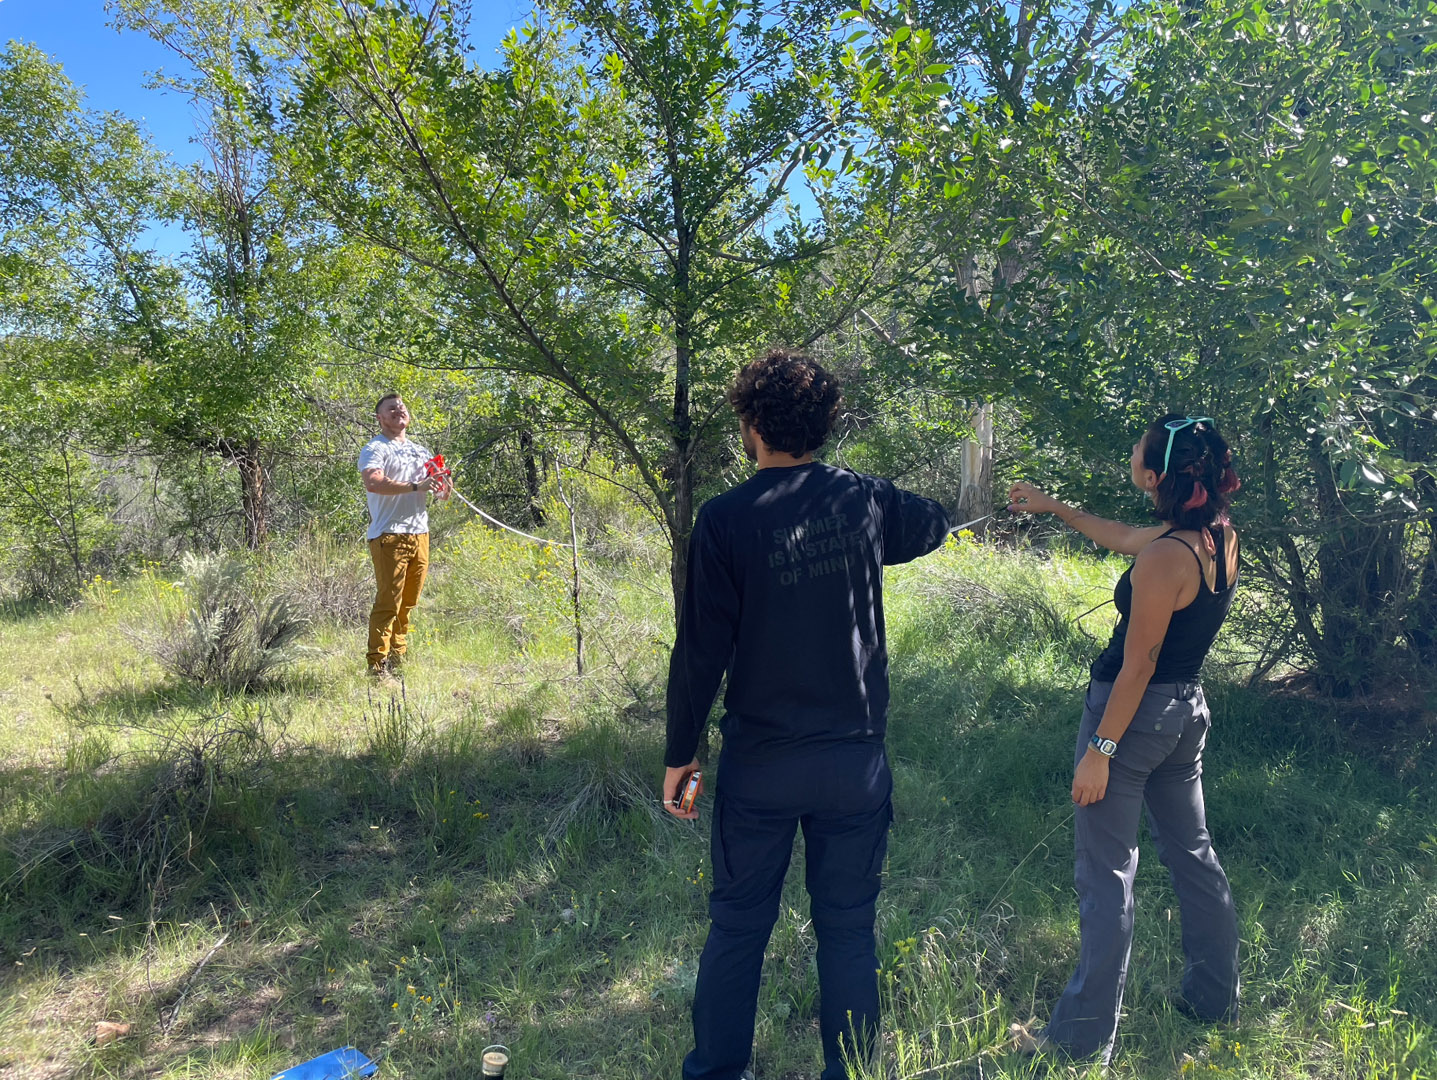 Students in Professor Krista Fish's primatology class are pictured gathering data on the trees in their plotted area. Photo taken and submitted by Emma Ulbrich '22.